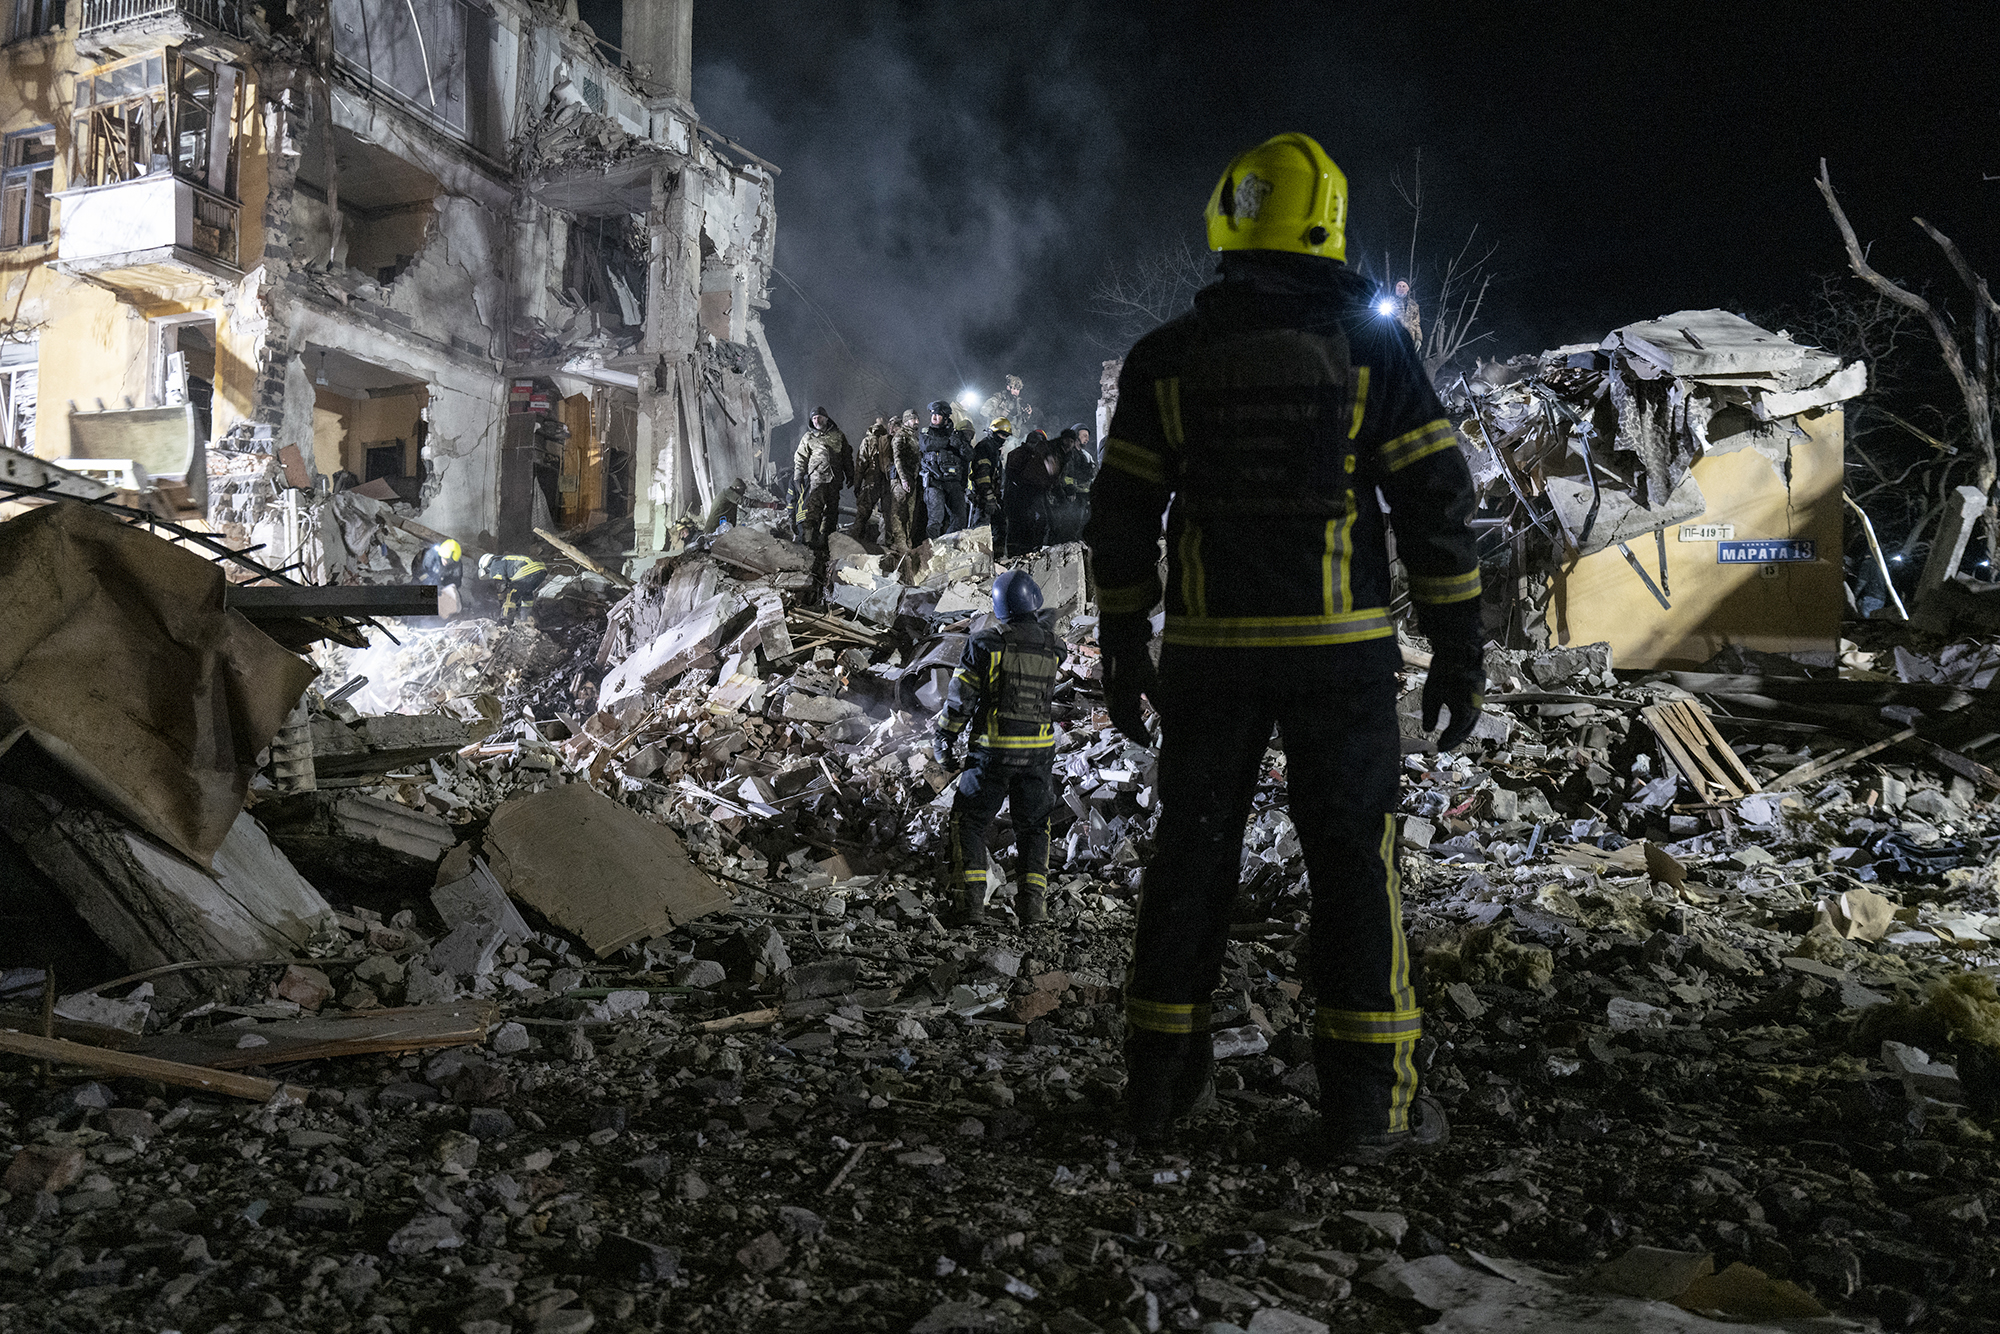 Rescue workers conduct search and rescue operations after a Russian missile hits a residential building in Kramatorsk, Ukraine, on February 1.